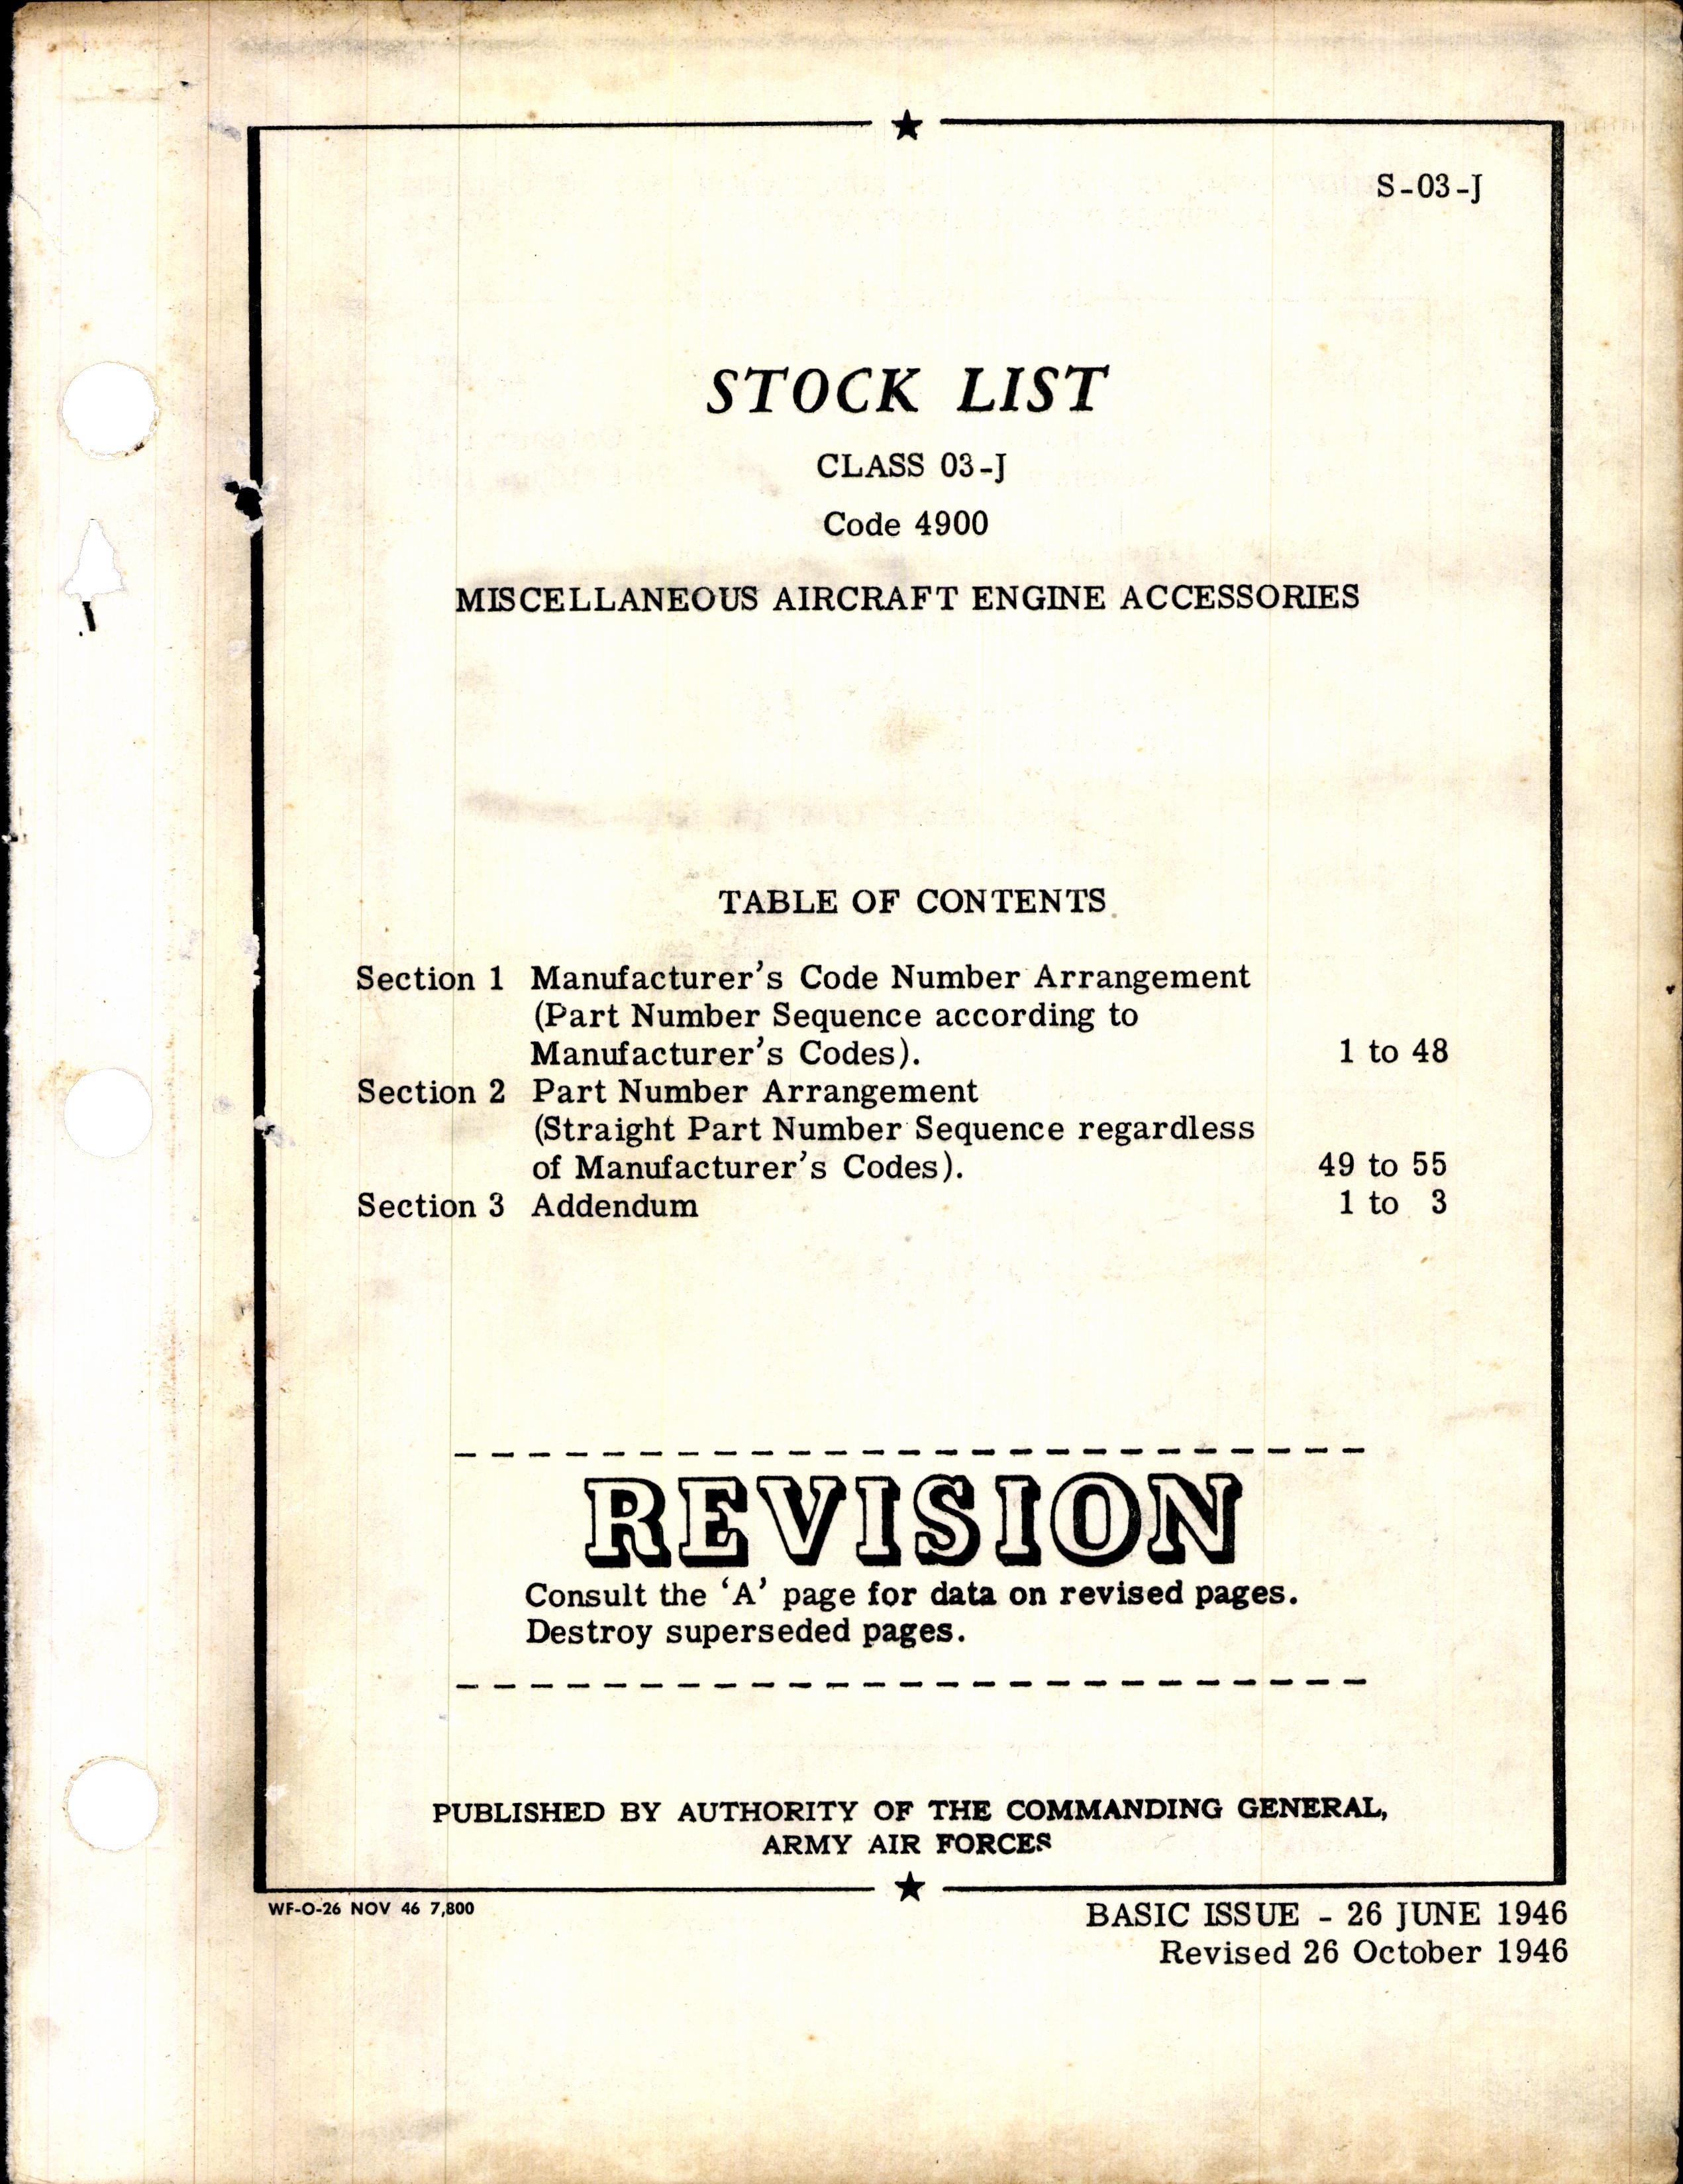 Sample page 5 from AirCorps Library document: Dead Items Stock List for Miscellaneous Aircraft Engine Accessories